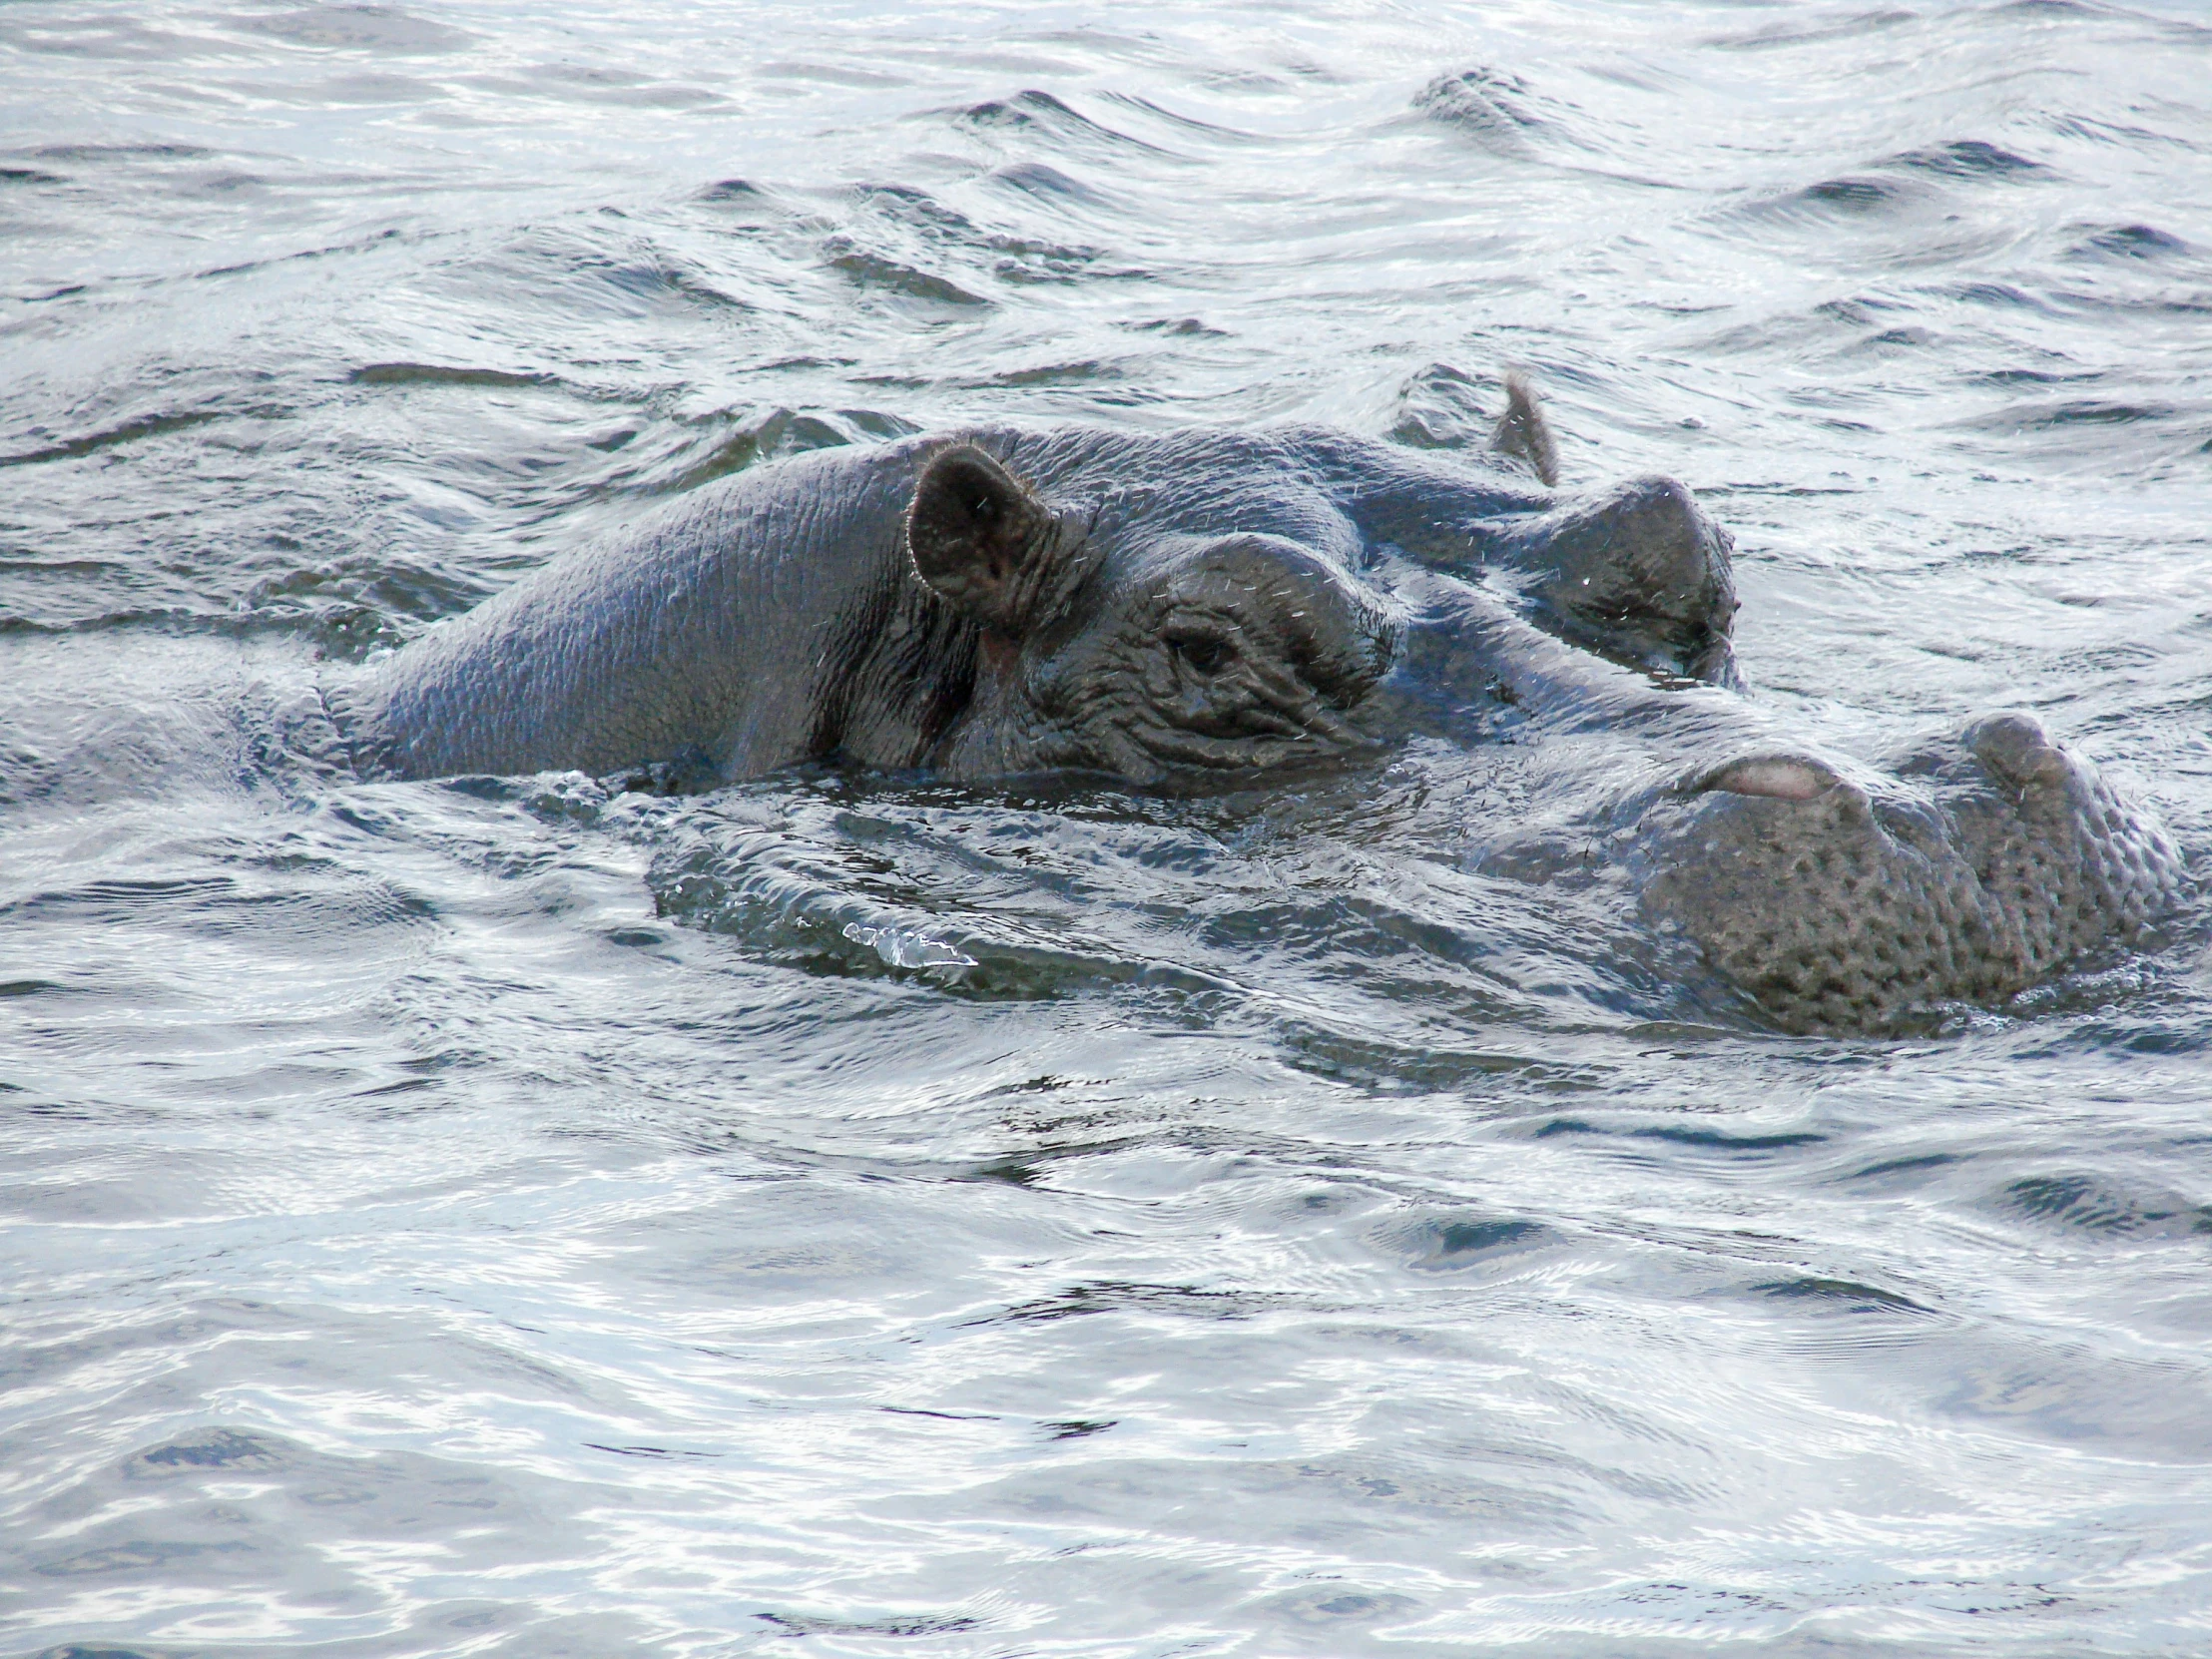 two large gray elephants are swimming in the water